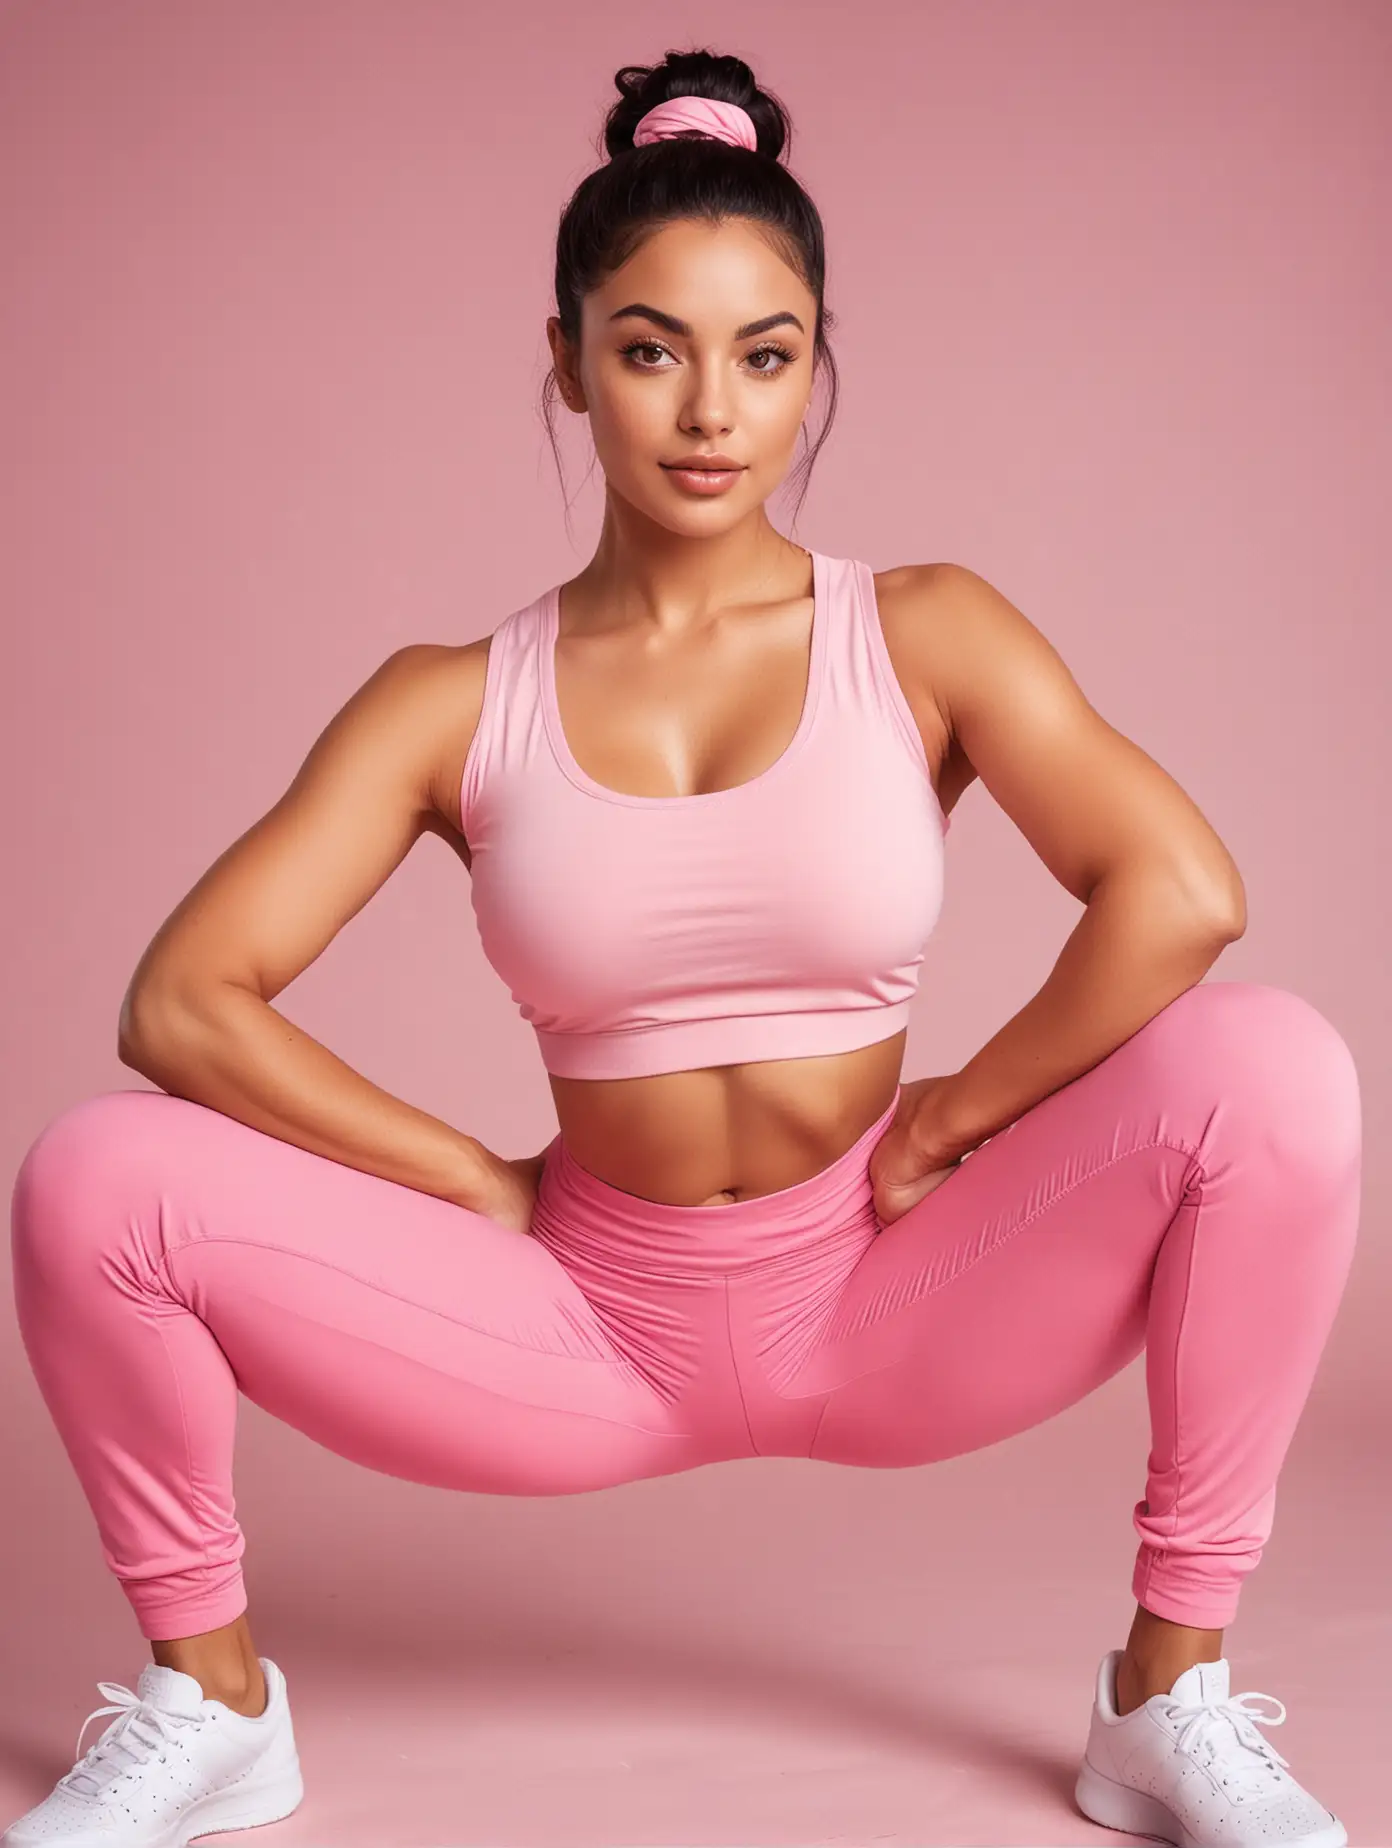 Voluptuous latina, with thin eyebrows, hazel eyes, straight black hair, pink sports top, pink yoga pants, white sneakers.